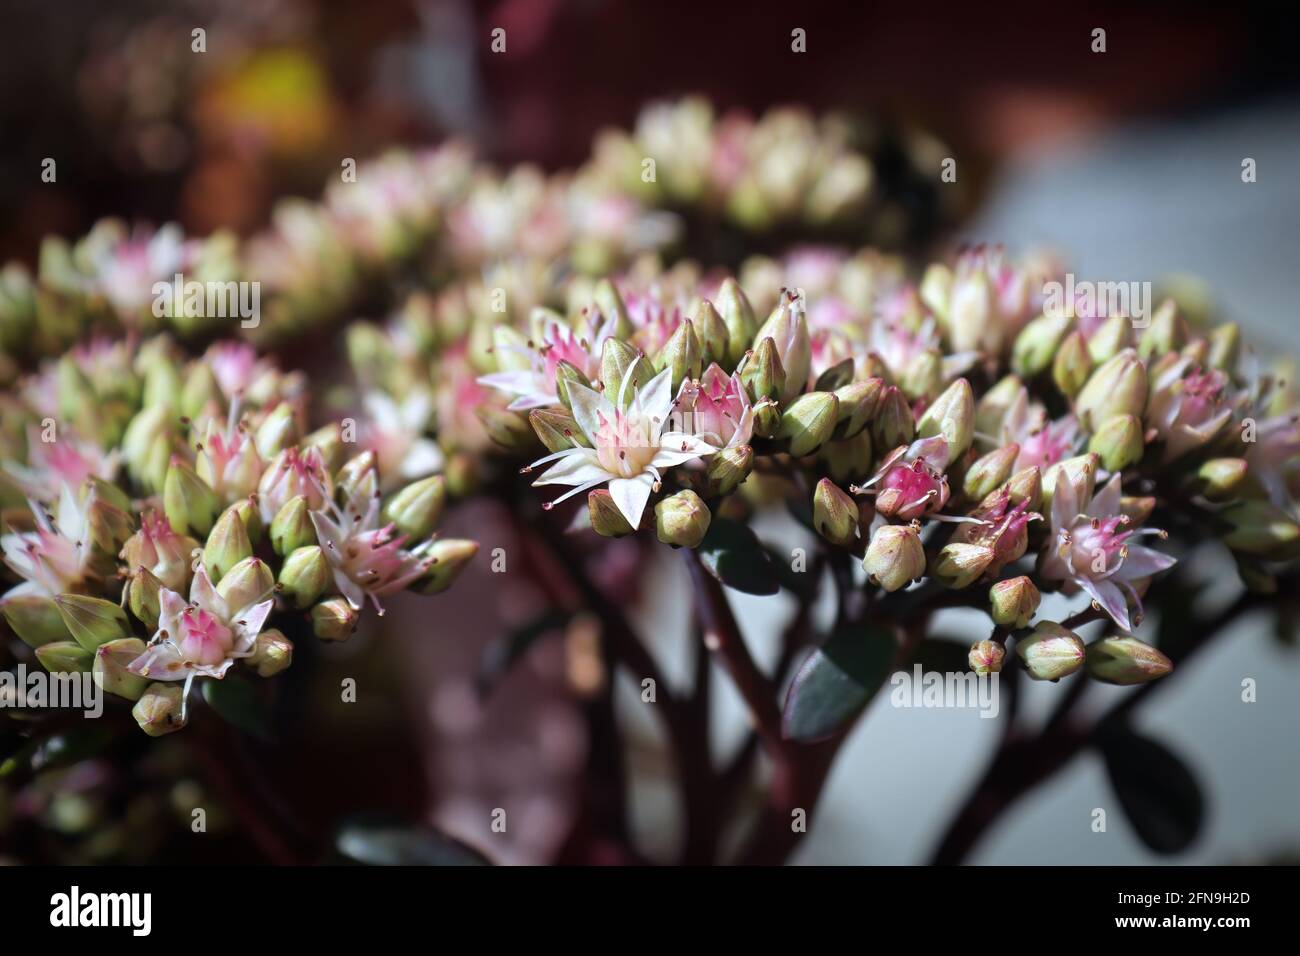 White and pink flower clusters in spring Stock Photo